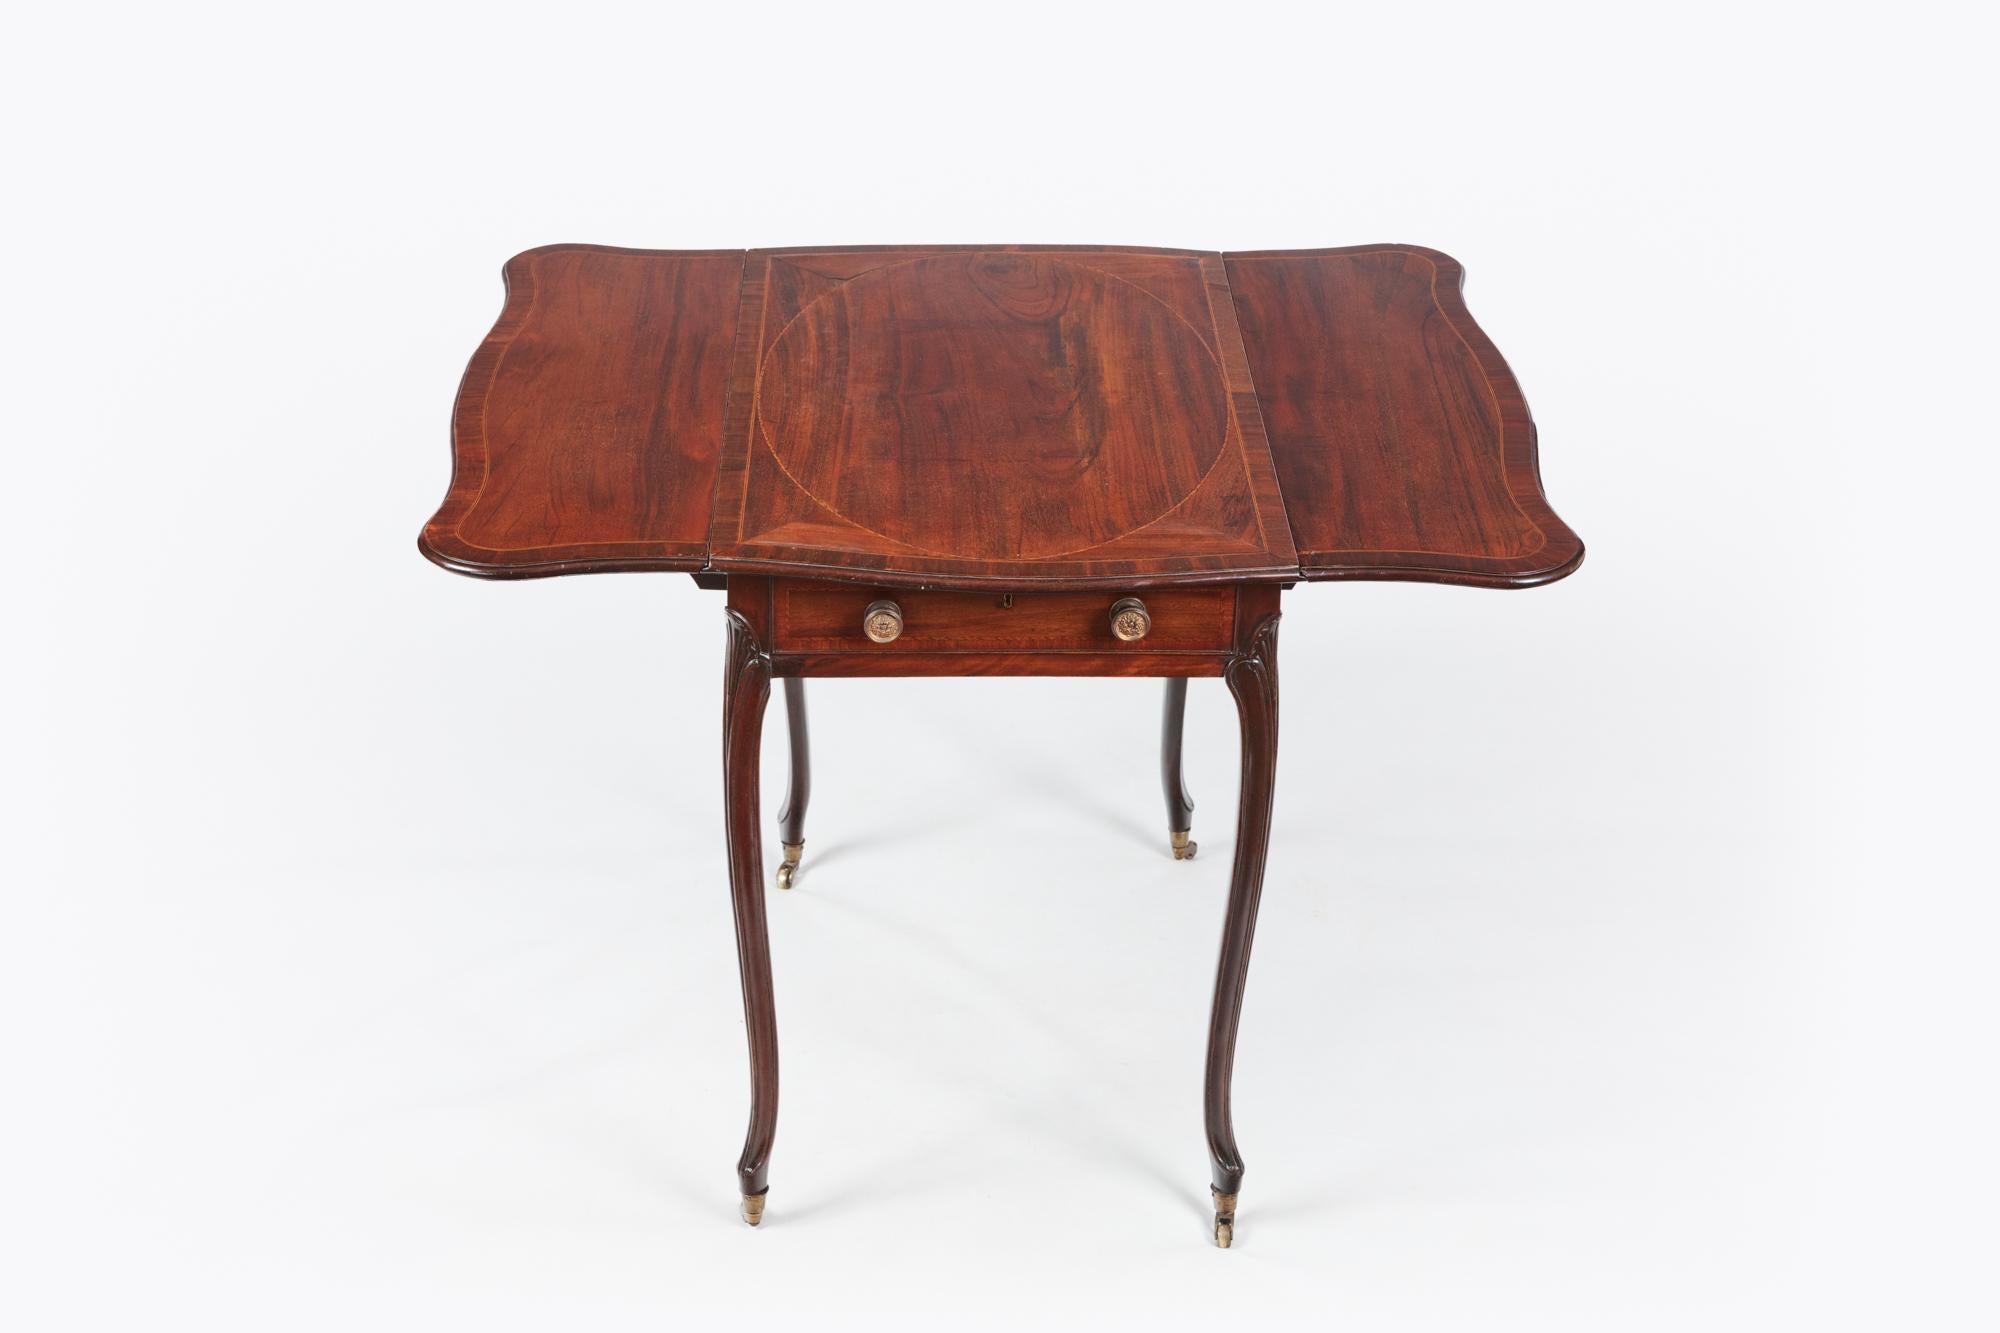 George III Late 18th Century Pembroke Table After Chippendale Design For Sale